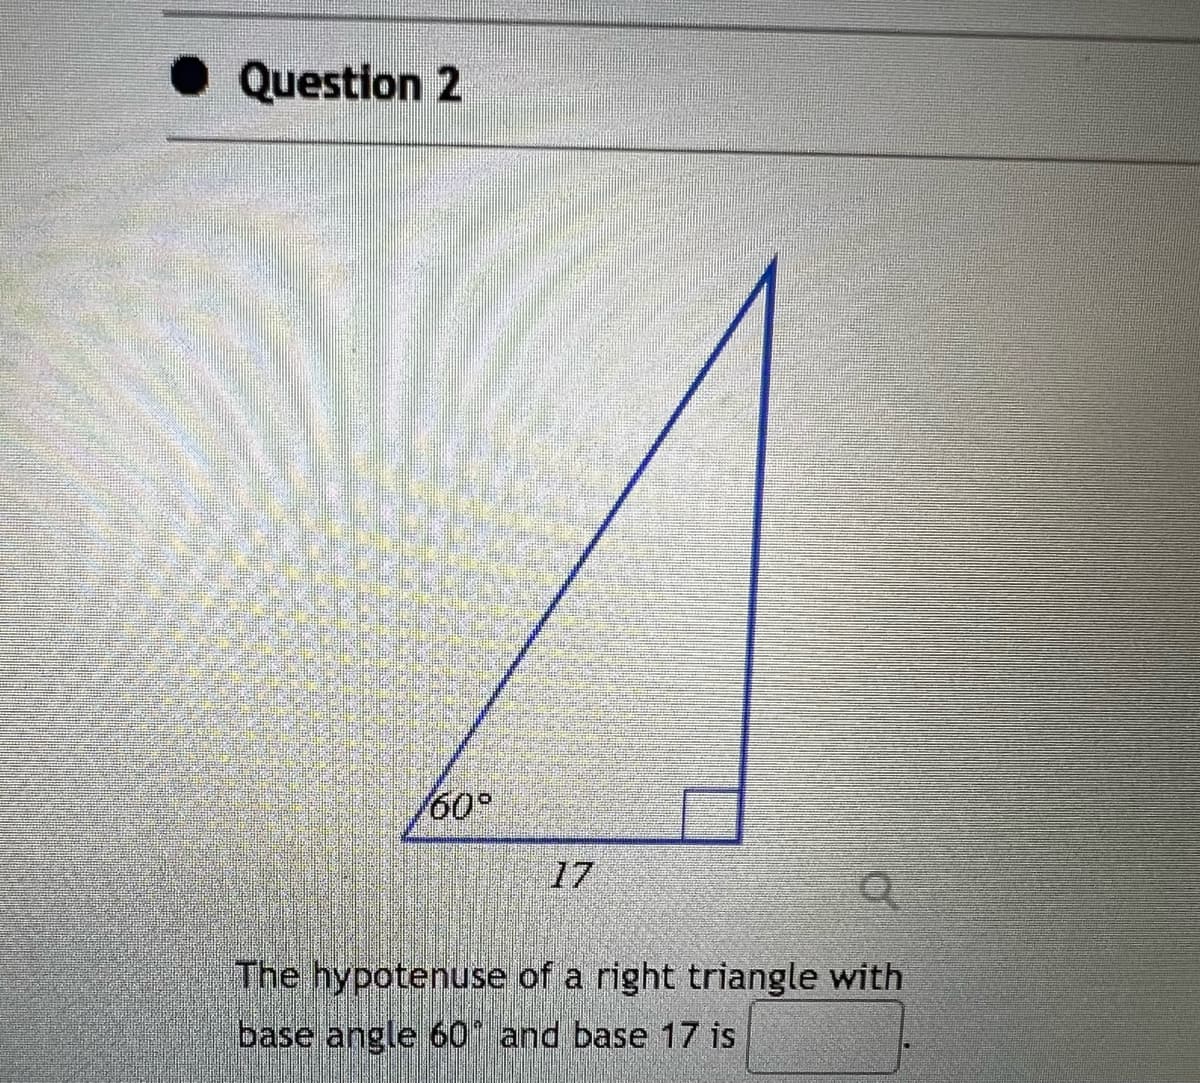 ◆ Question 2
60°
Q
The hypotenuse of a right triangle with
base angle 60° and base 17 is